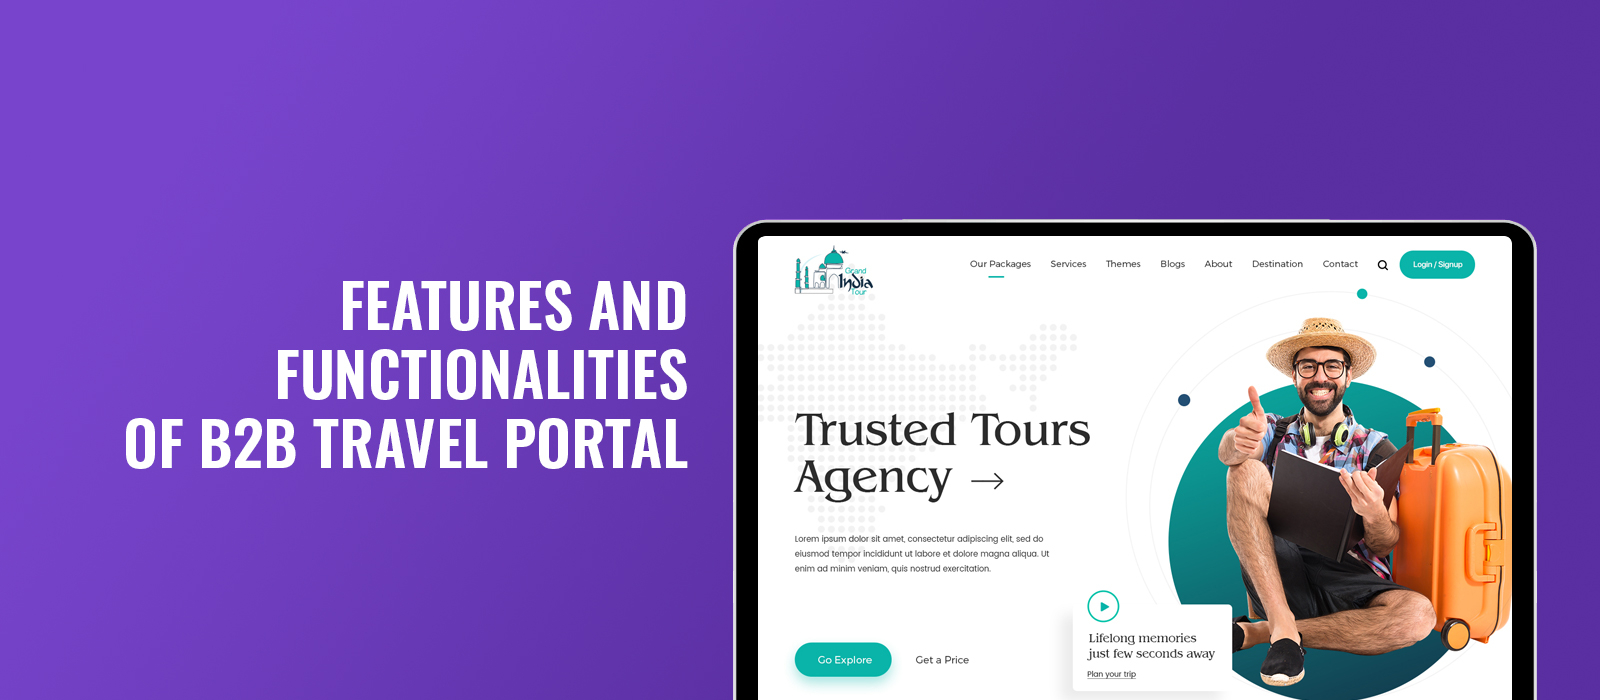 Features and Functionalities of B2B Travel Portals